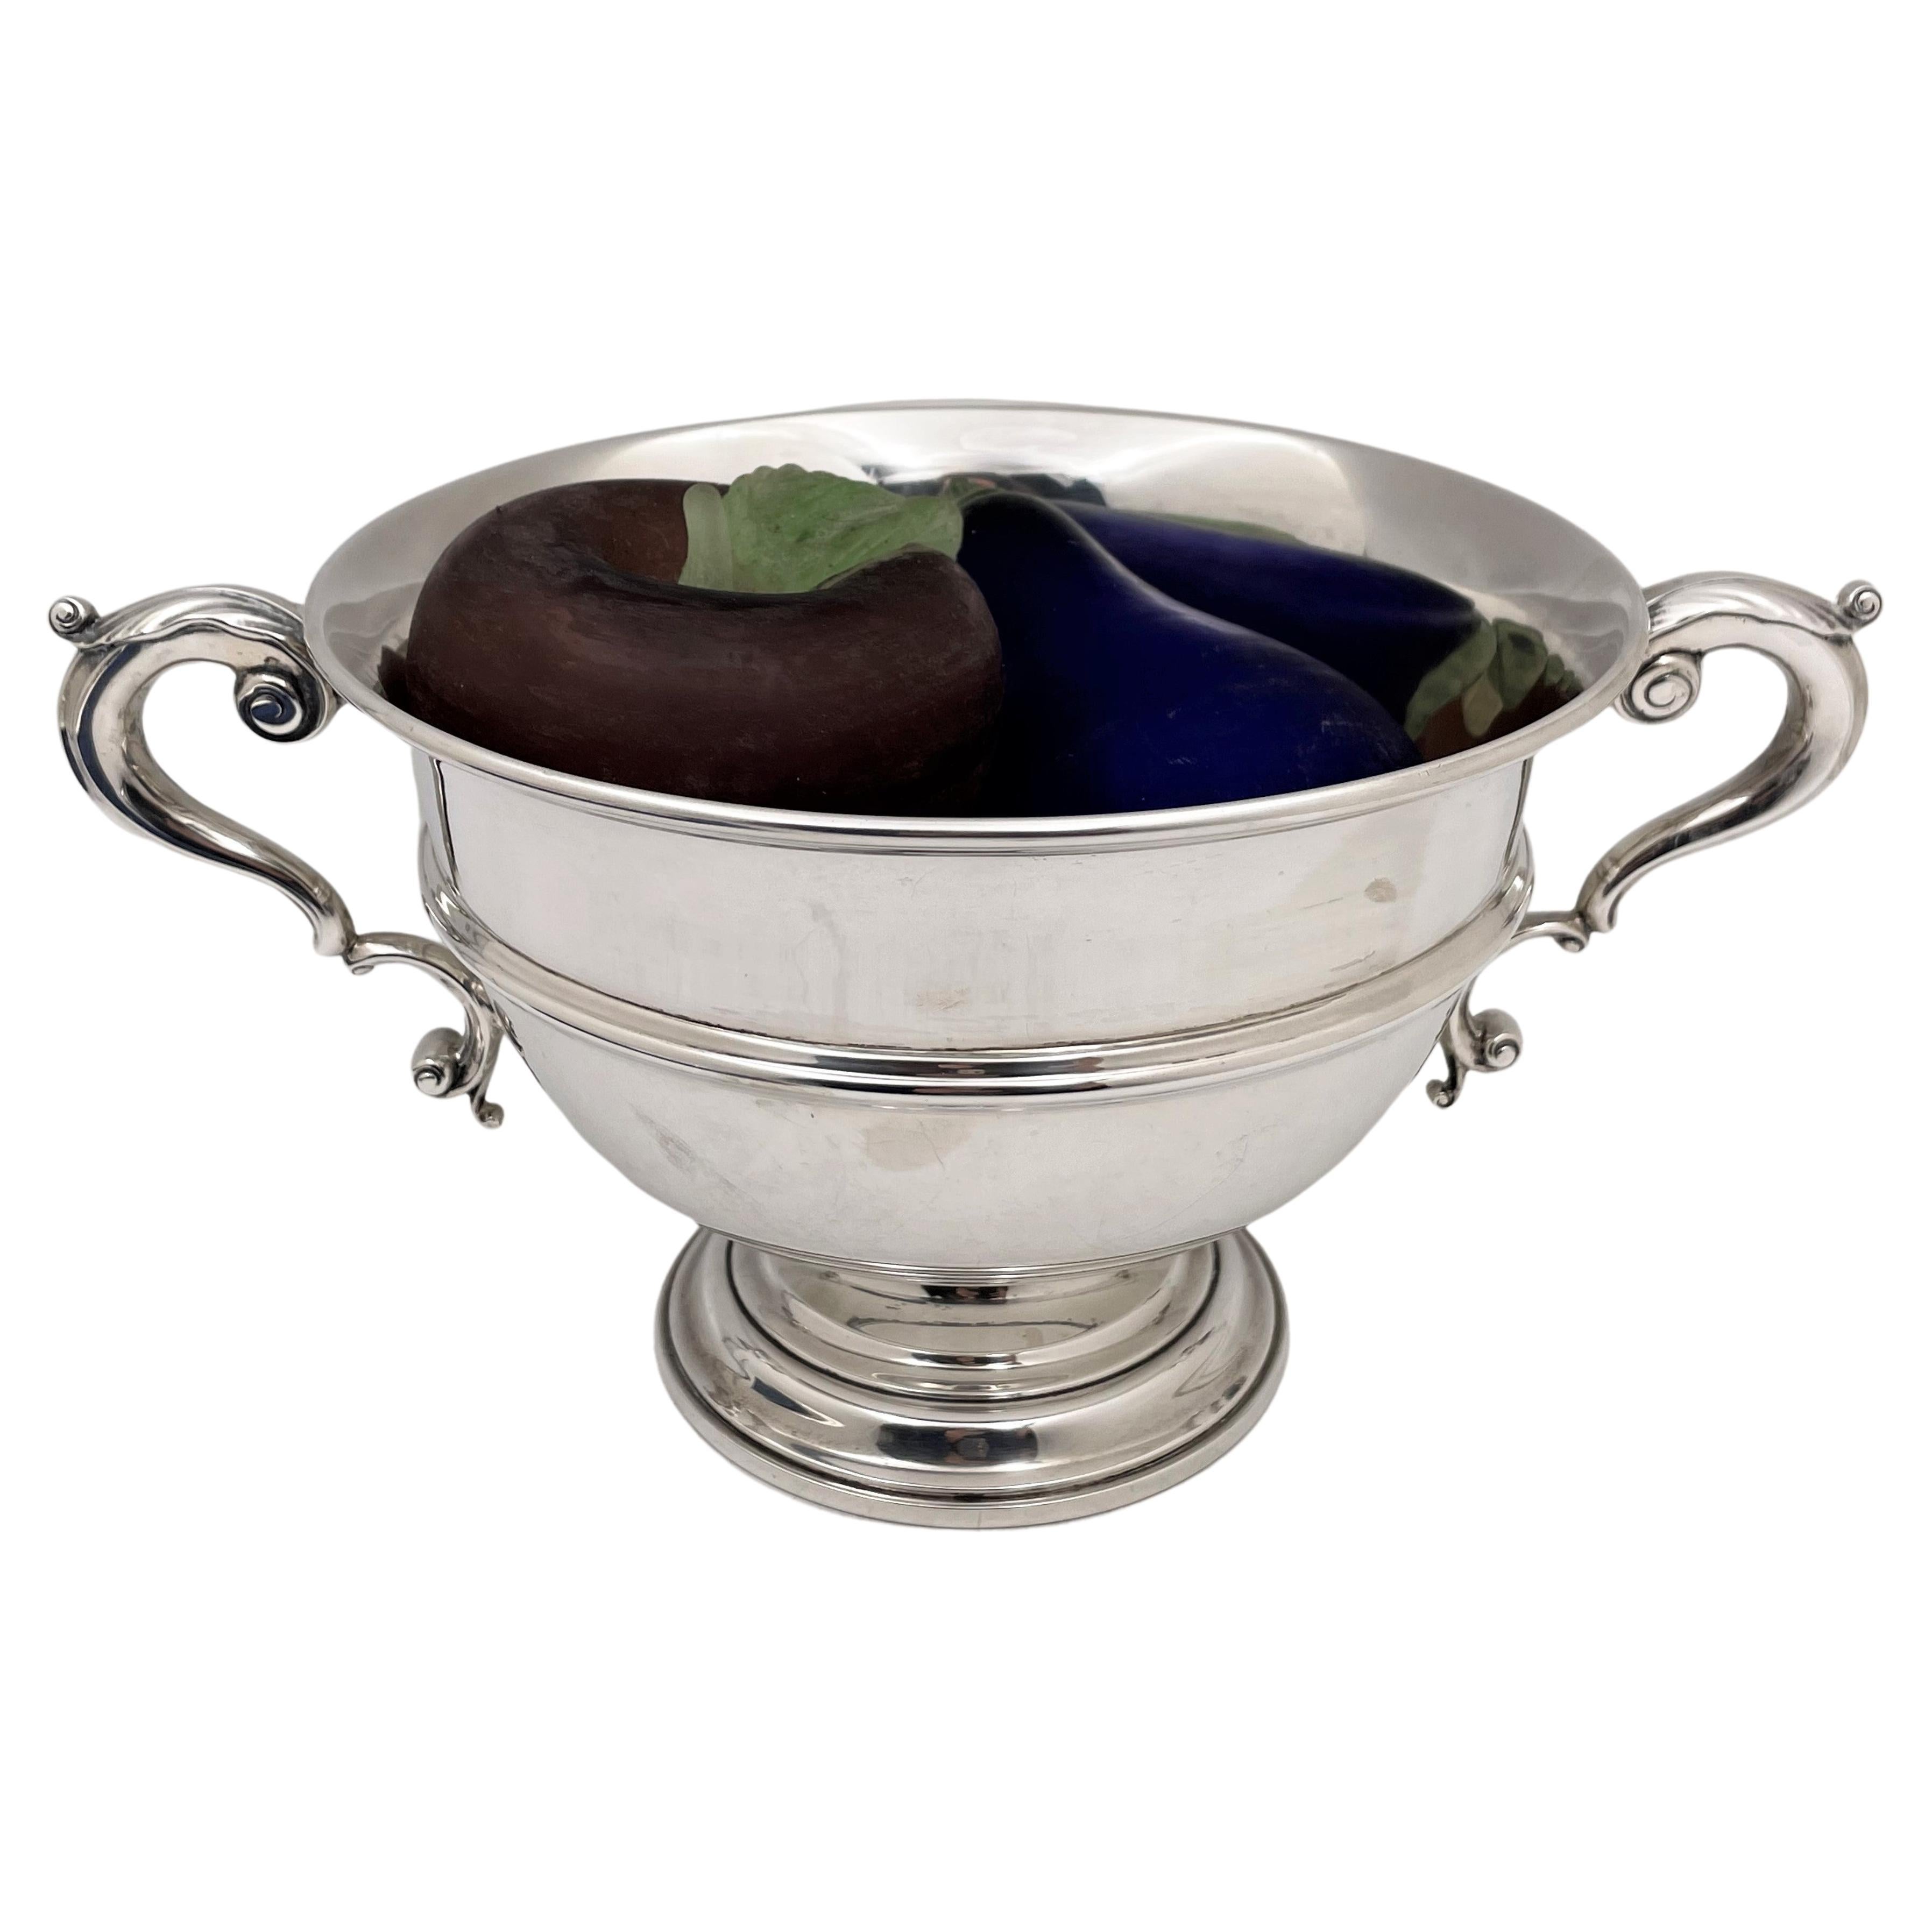 Cartier Sterling Silver Two-Handled Centerpiece Bowl/ Trophy